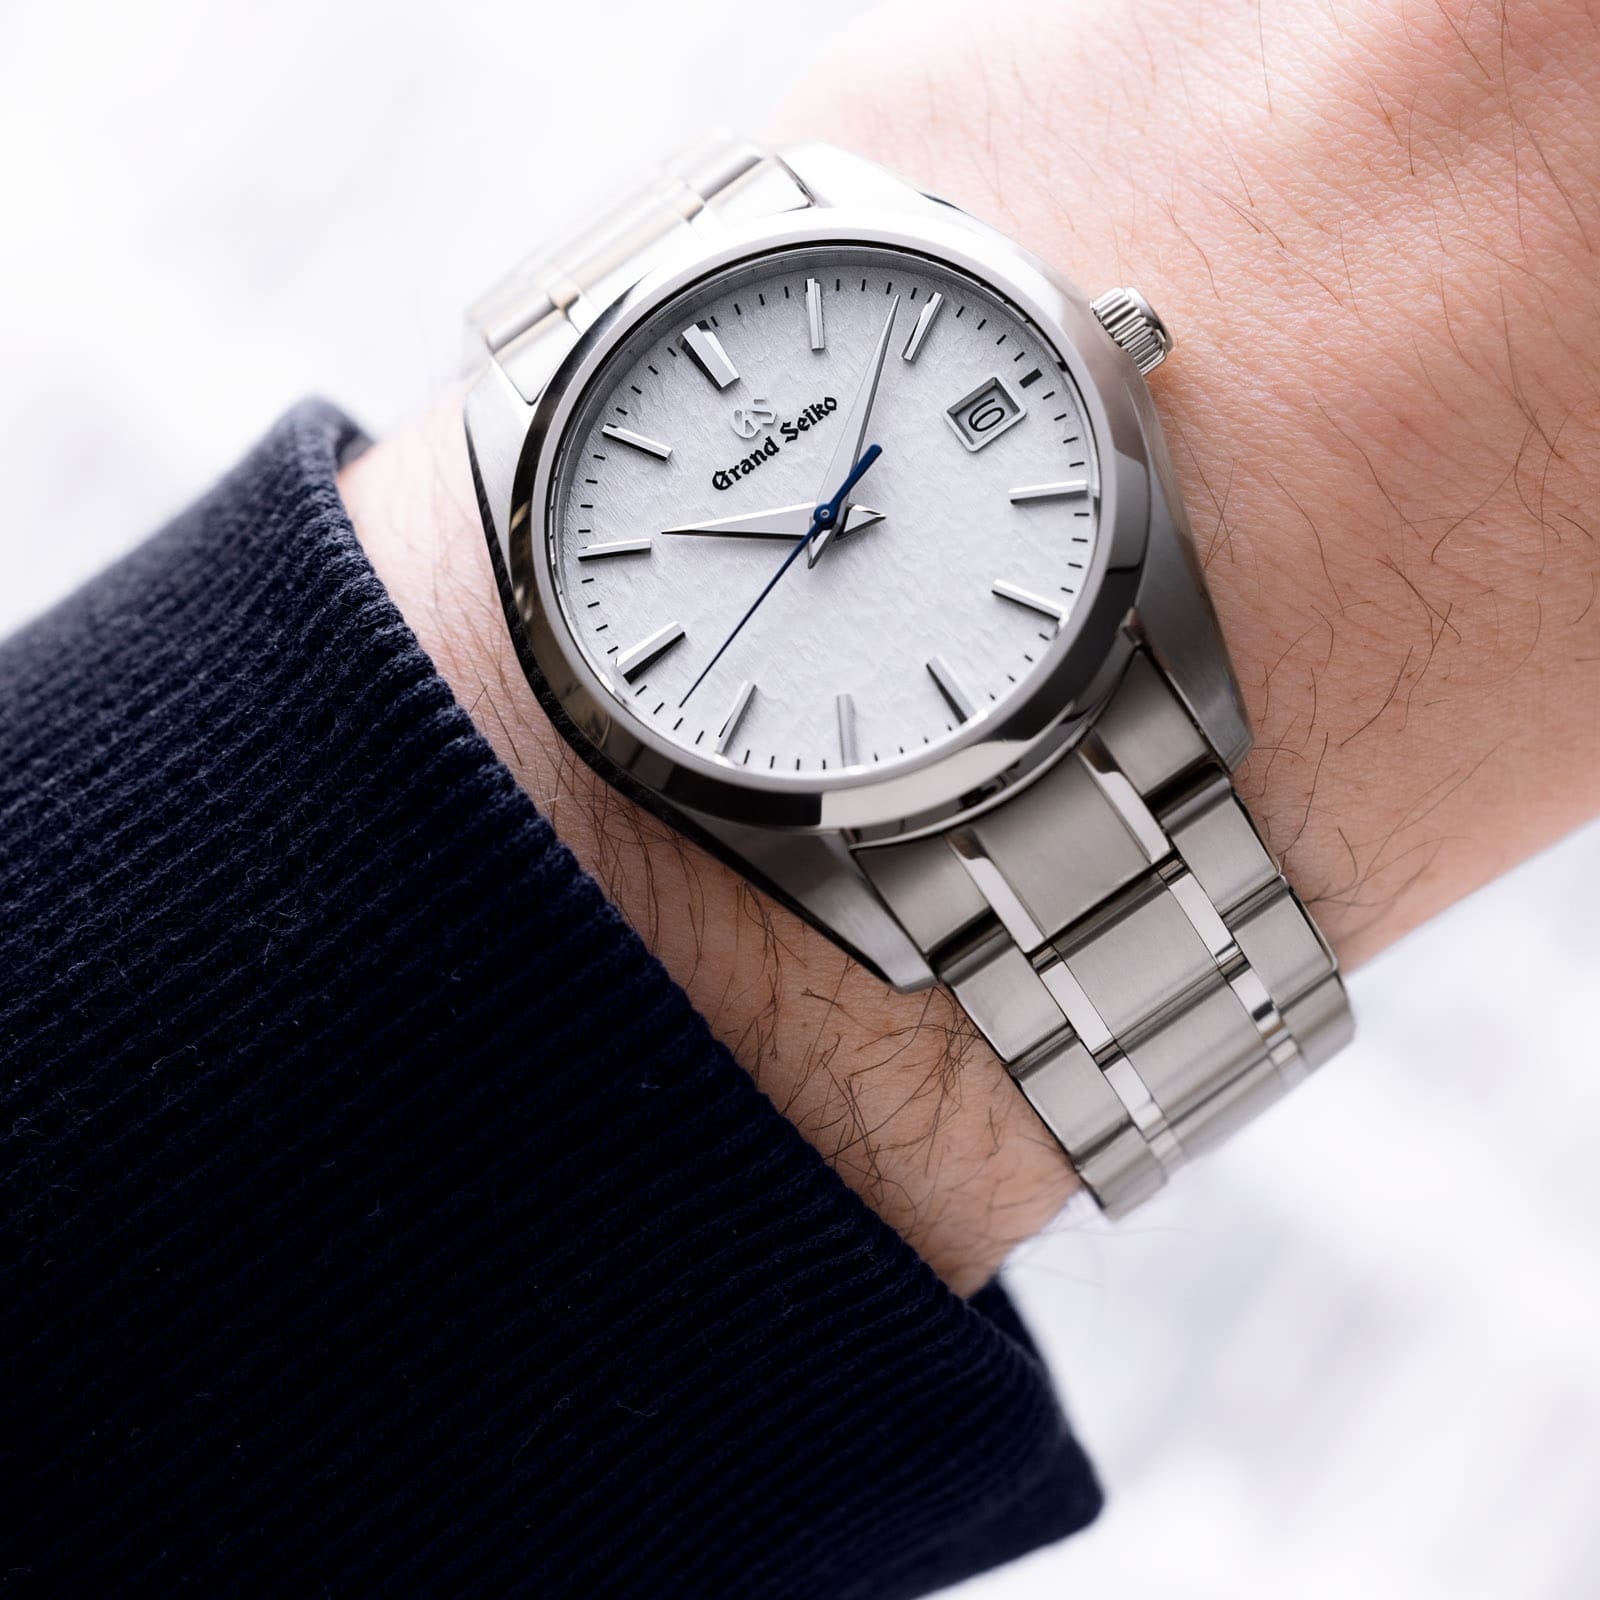 Grand Seiko’s two new “Snowflake” models incite an interesting discussion